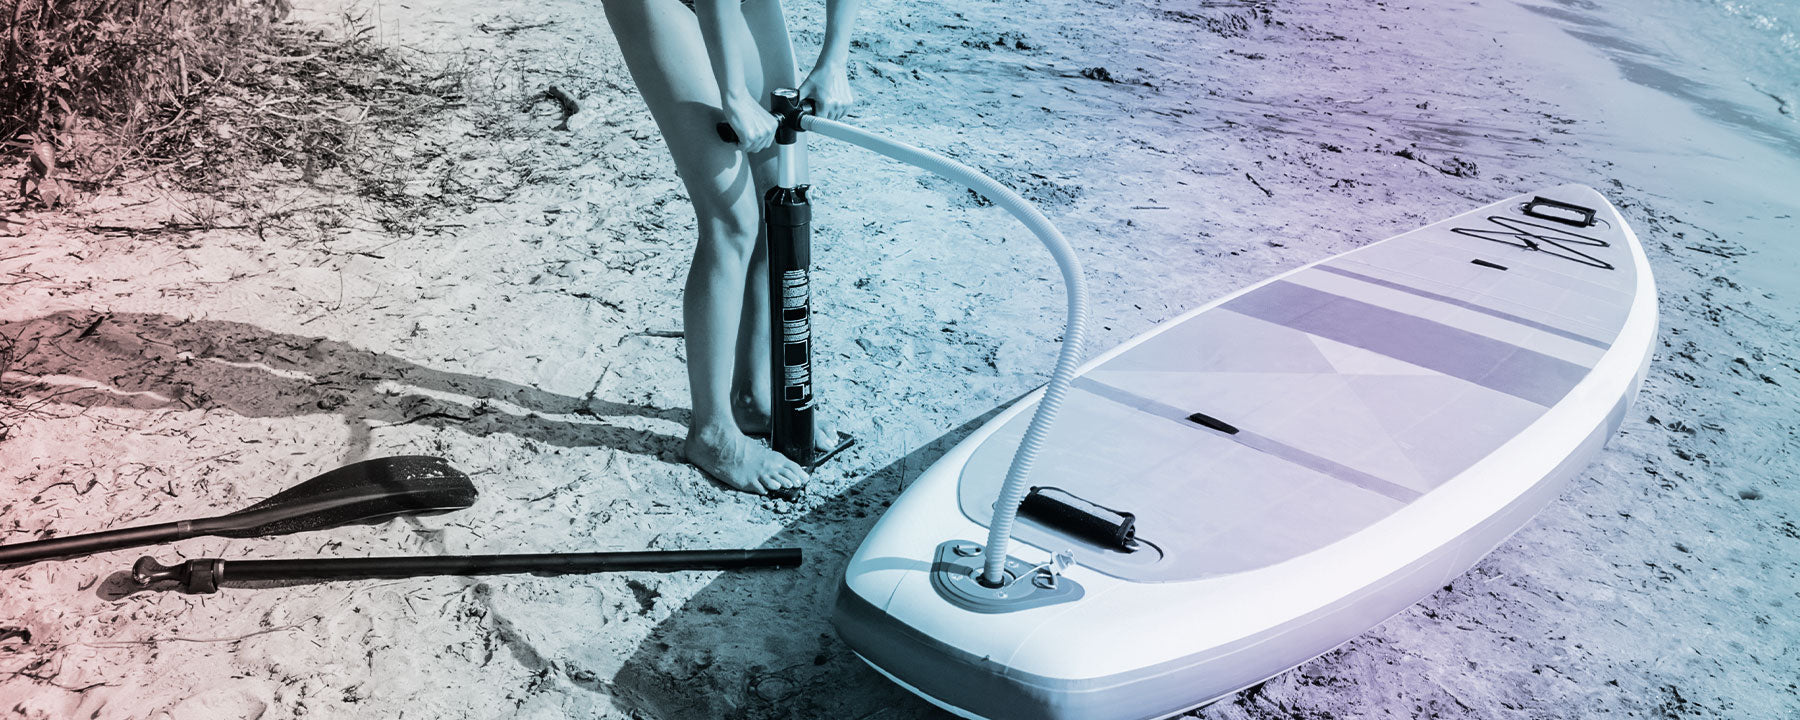 How to Properly Repair Your Inflatable SUP - Turn The Tide, a blog by HeySurf